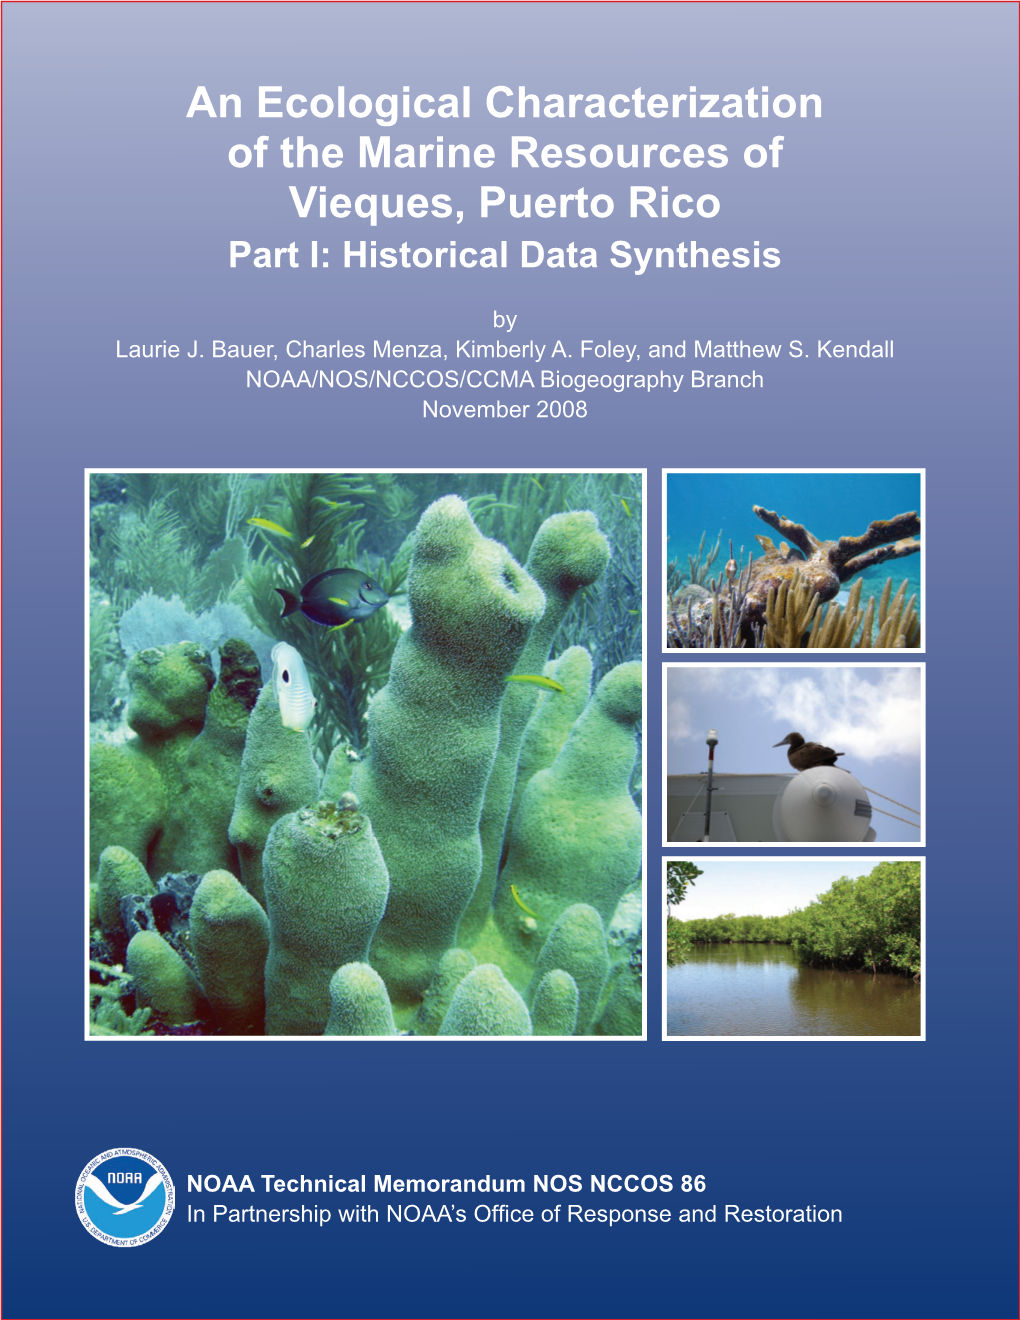 An Ecological Characterization of the Marine Resources of Vieques, Puerto Rico Part I: Historical Data Synthesis